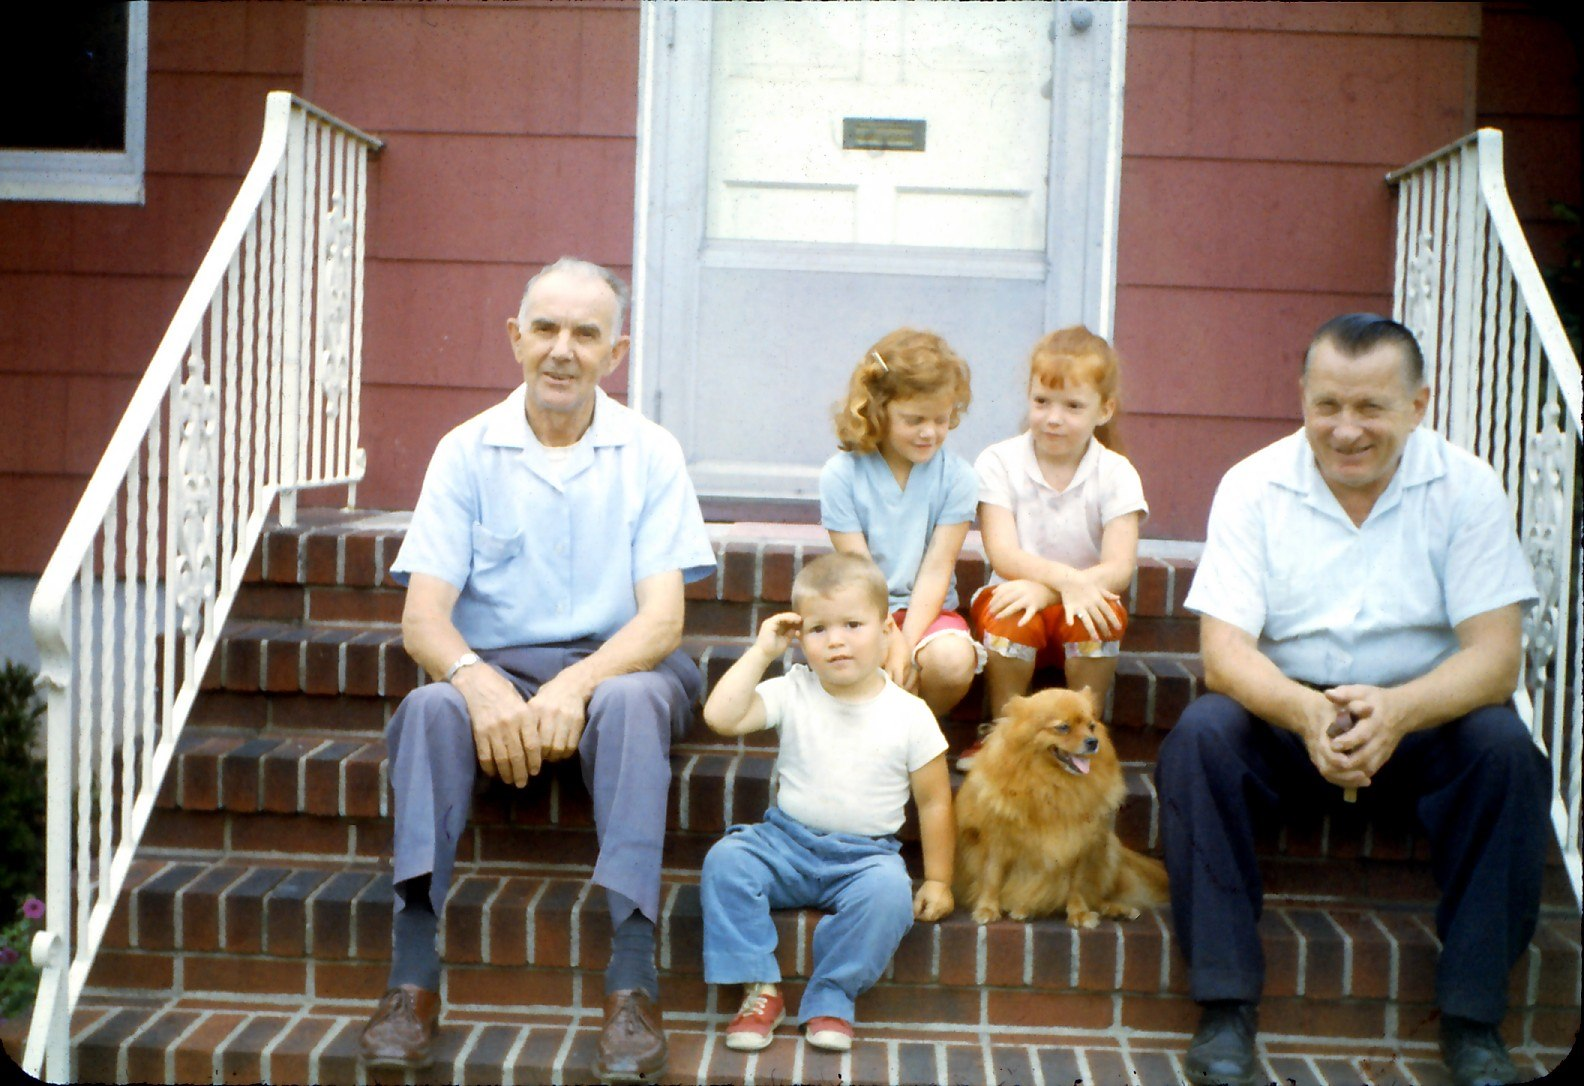 I must be doing something right. I found a picture of my sisters and me when we were kids, sitting on my grandfather's front porch with both of my grandfathers. At the time, they were both around 60 years old.